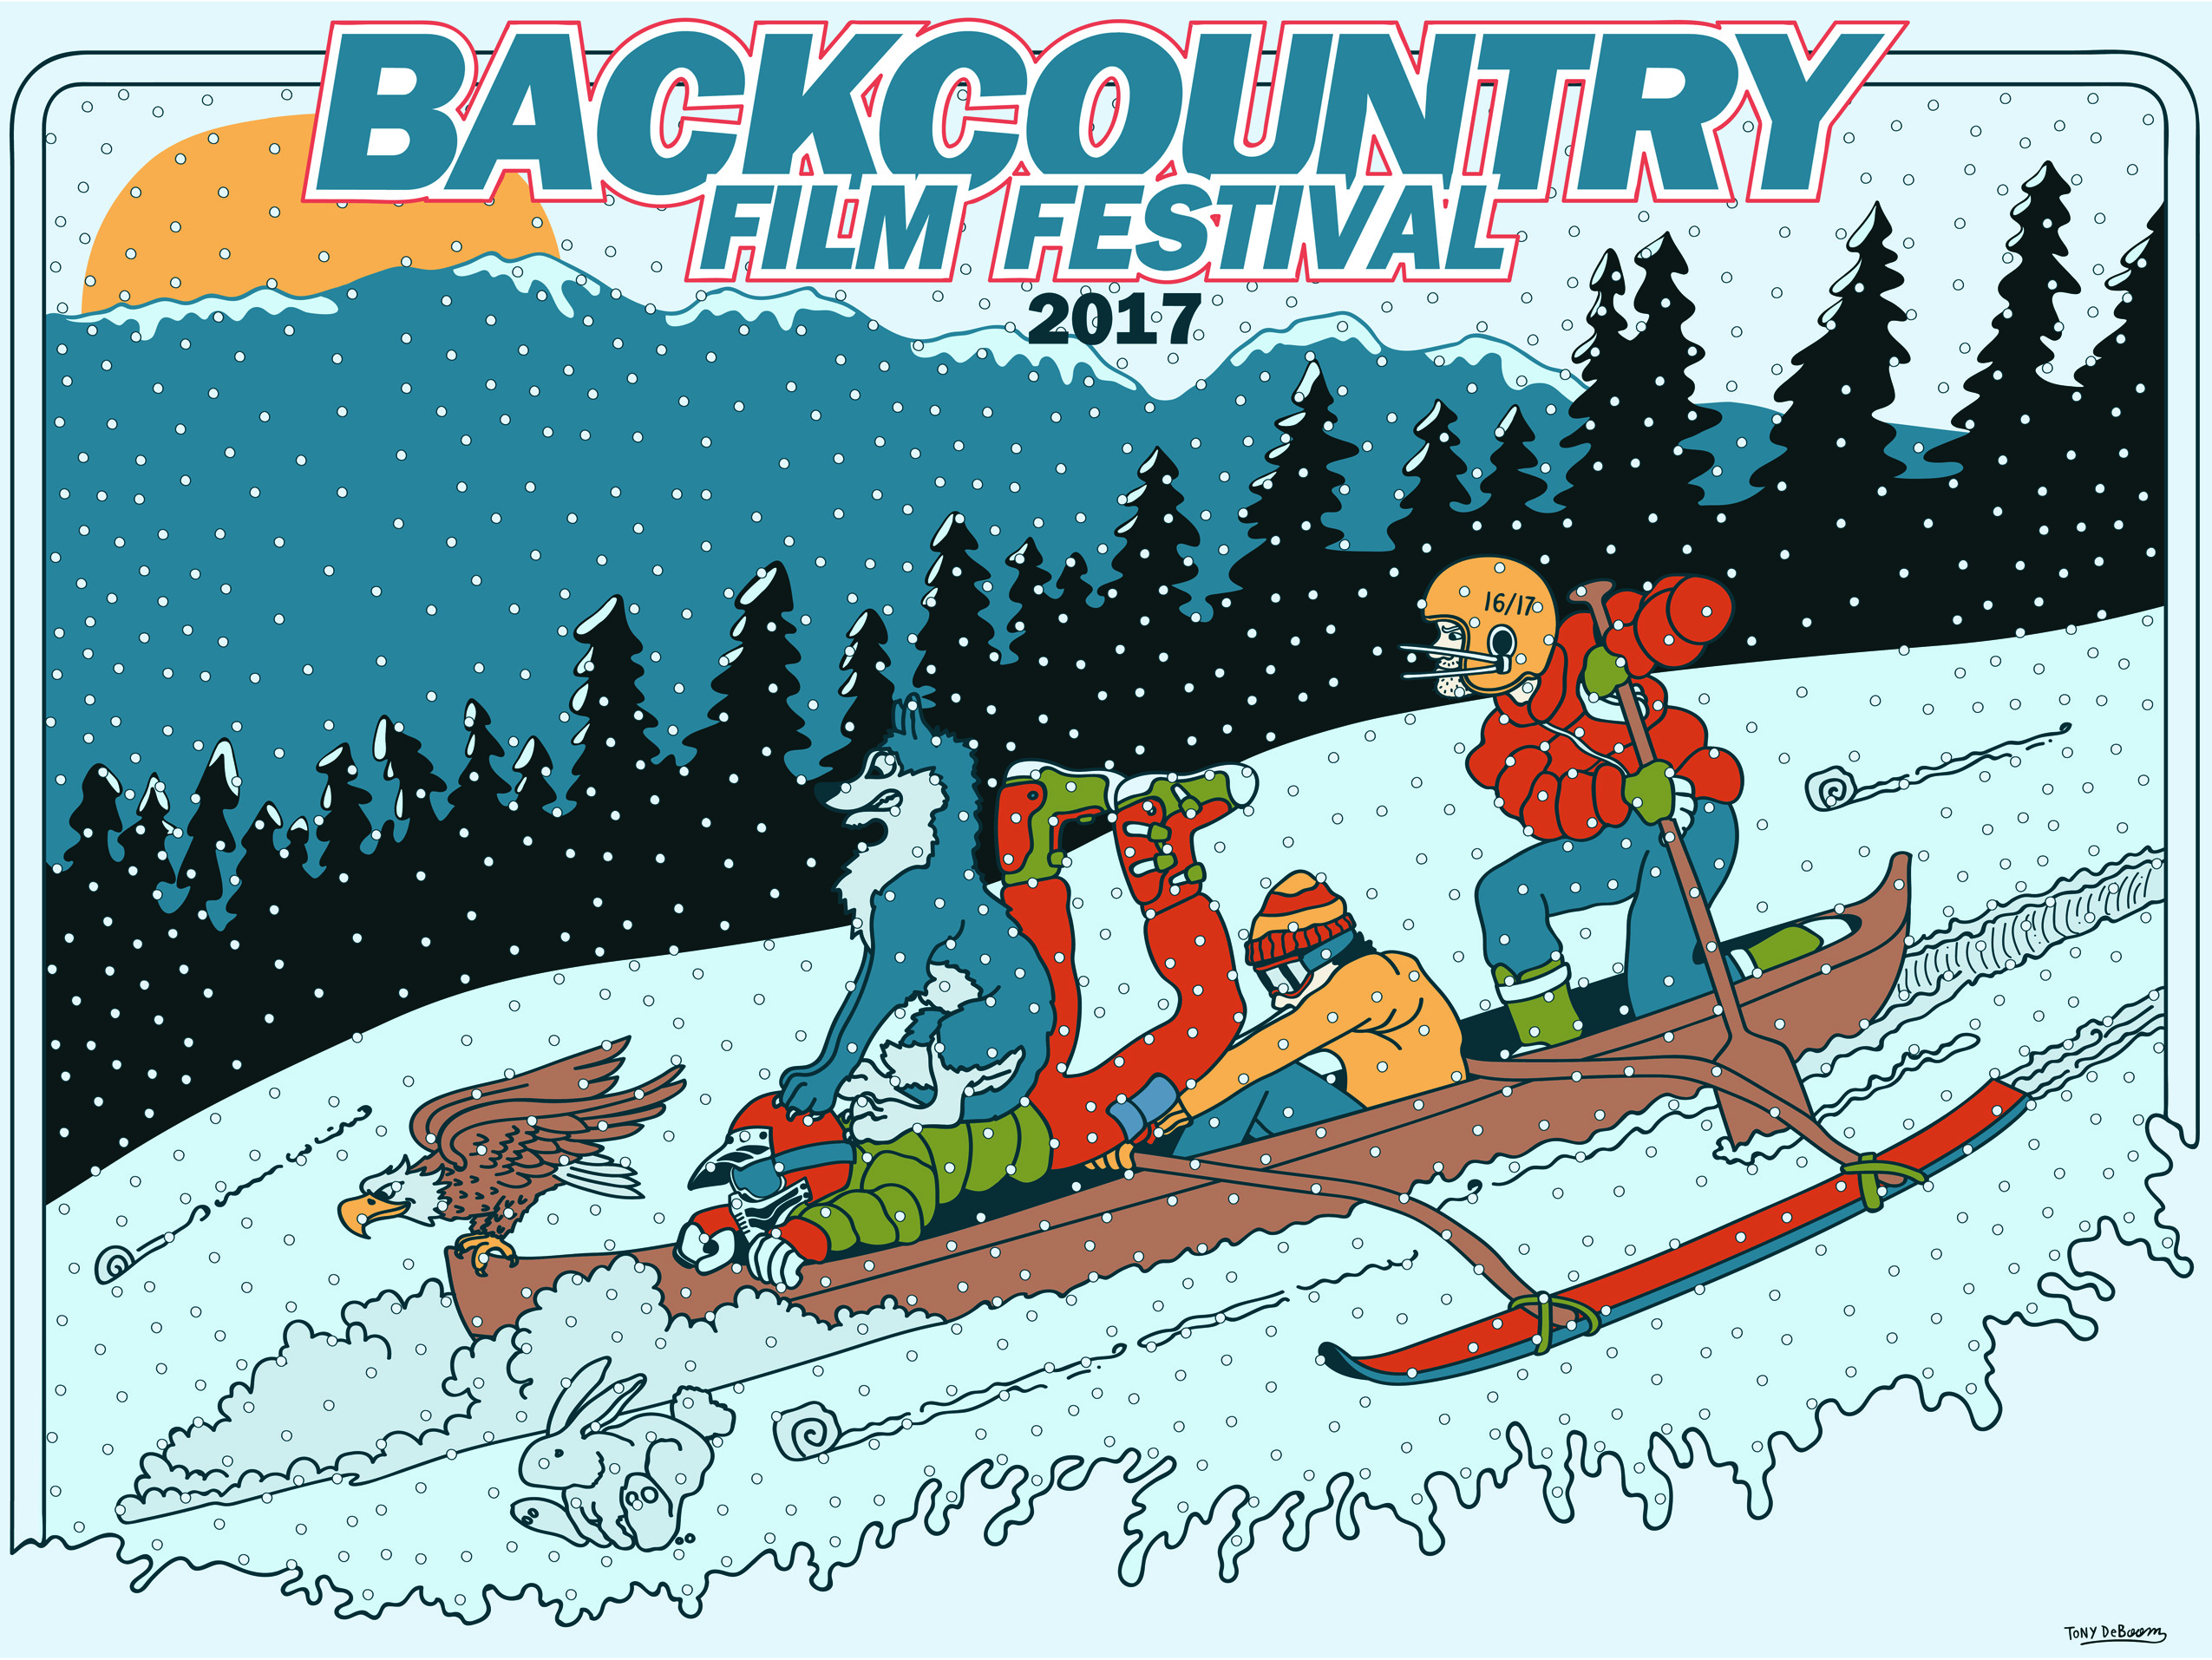 Backcountry Film Festival — The Mountaineers